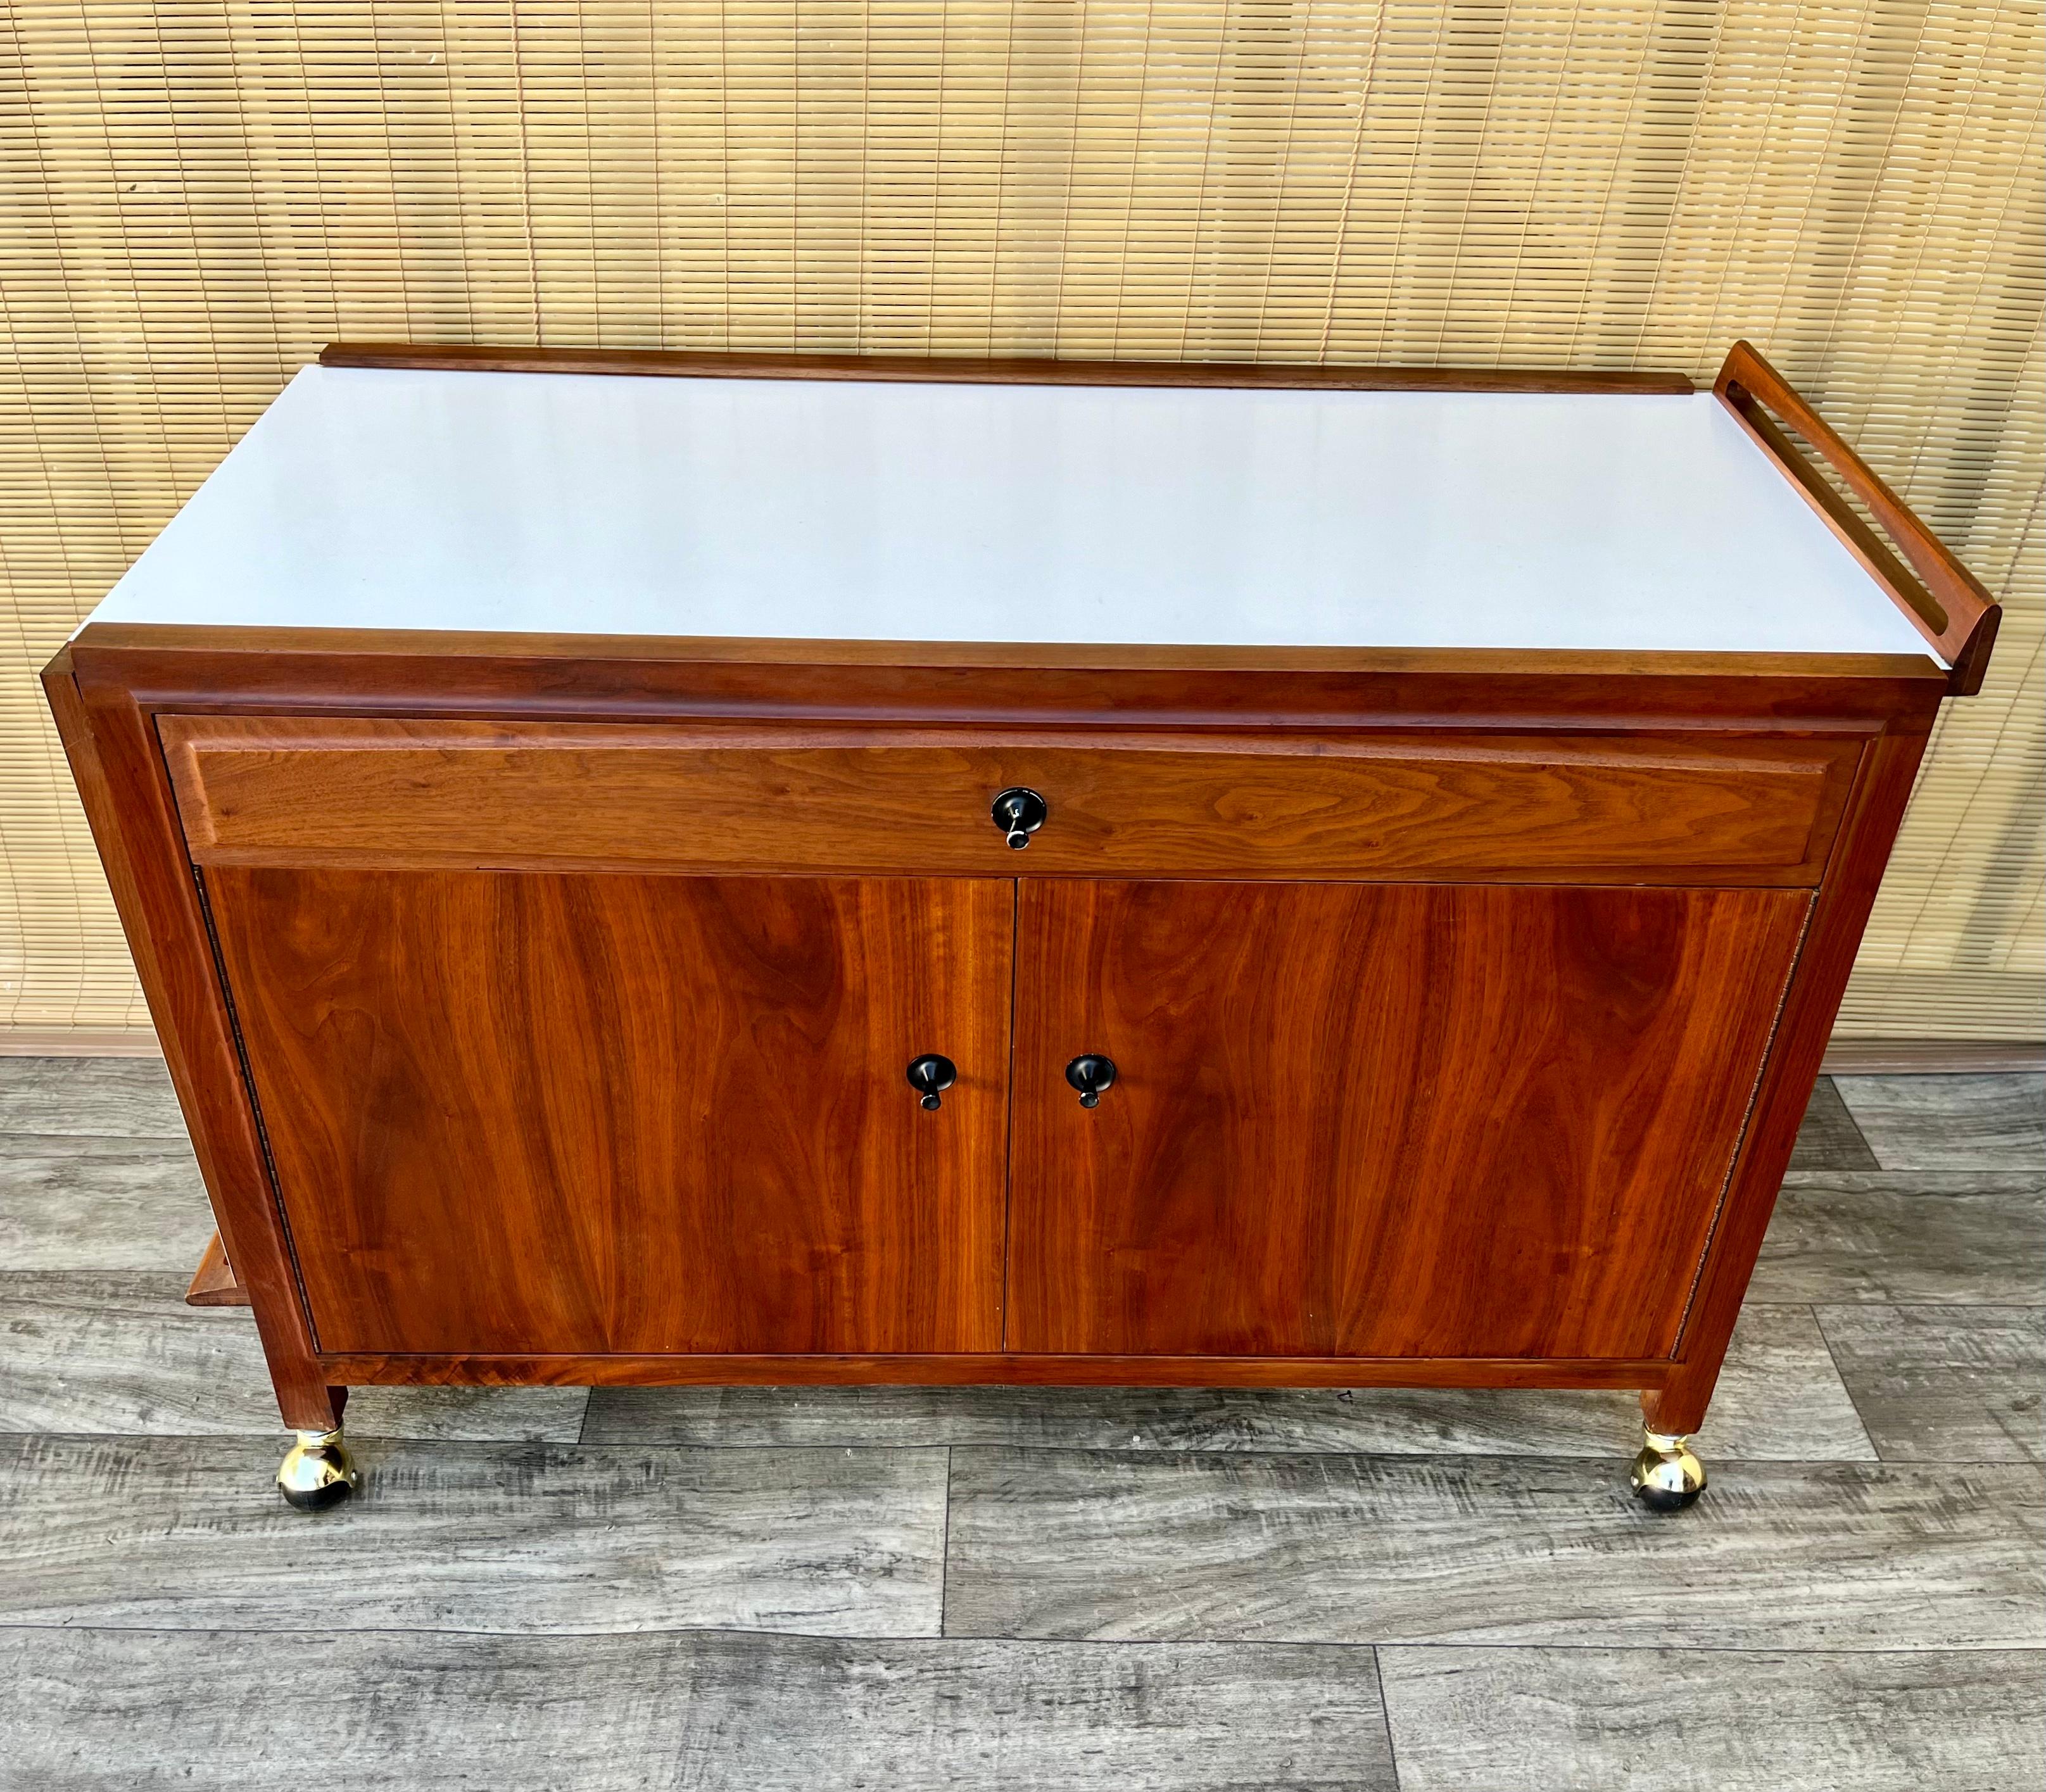 Vintage Mid Century John Stuart Buffet Server / Bar Cart. Circa 1960s. 
Features a quintessential sleek Mid Century Modern Design, two side cabinets, a top drawer, a expandable white laminated top, finished back, and casters for easy mobility. 
In